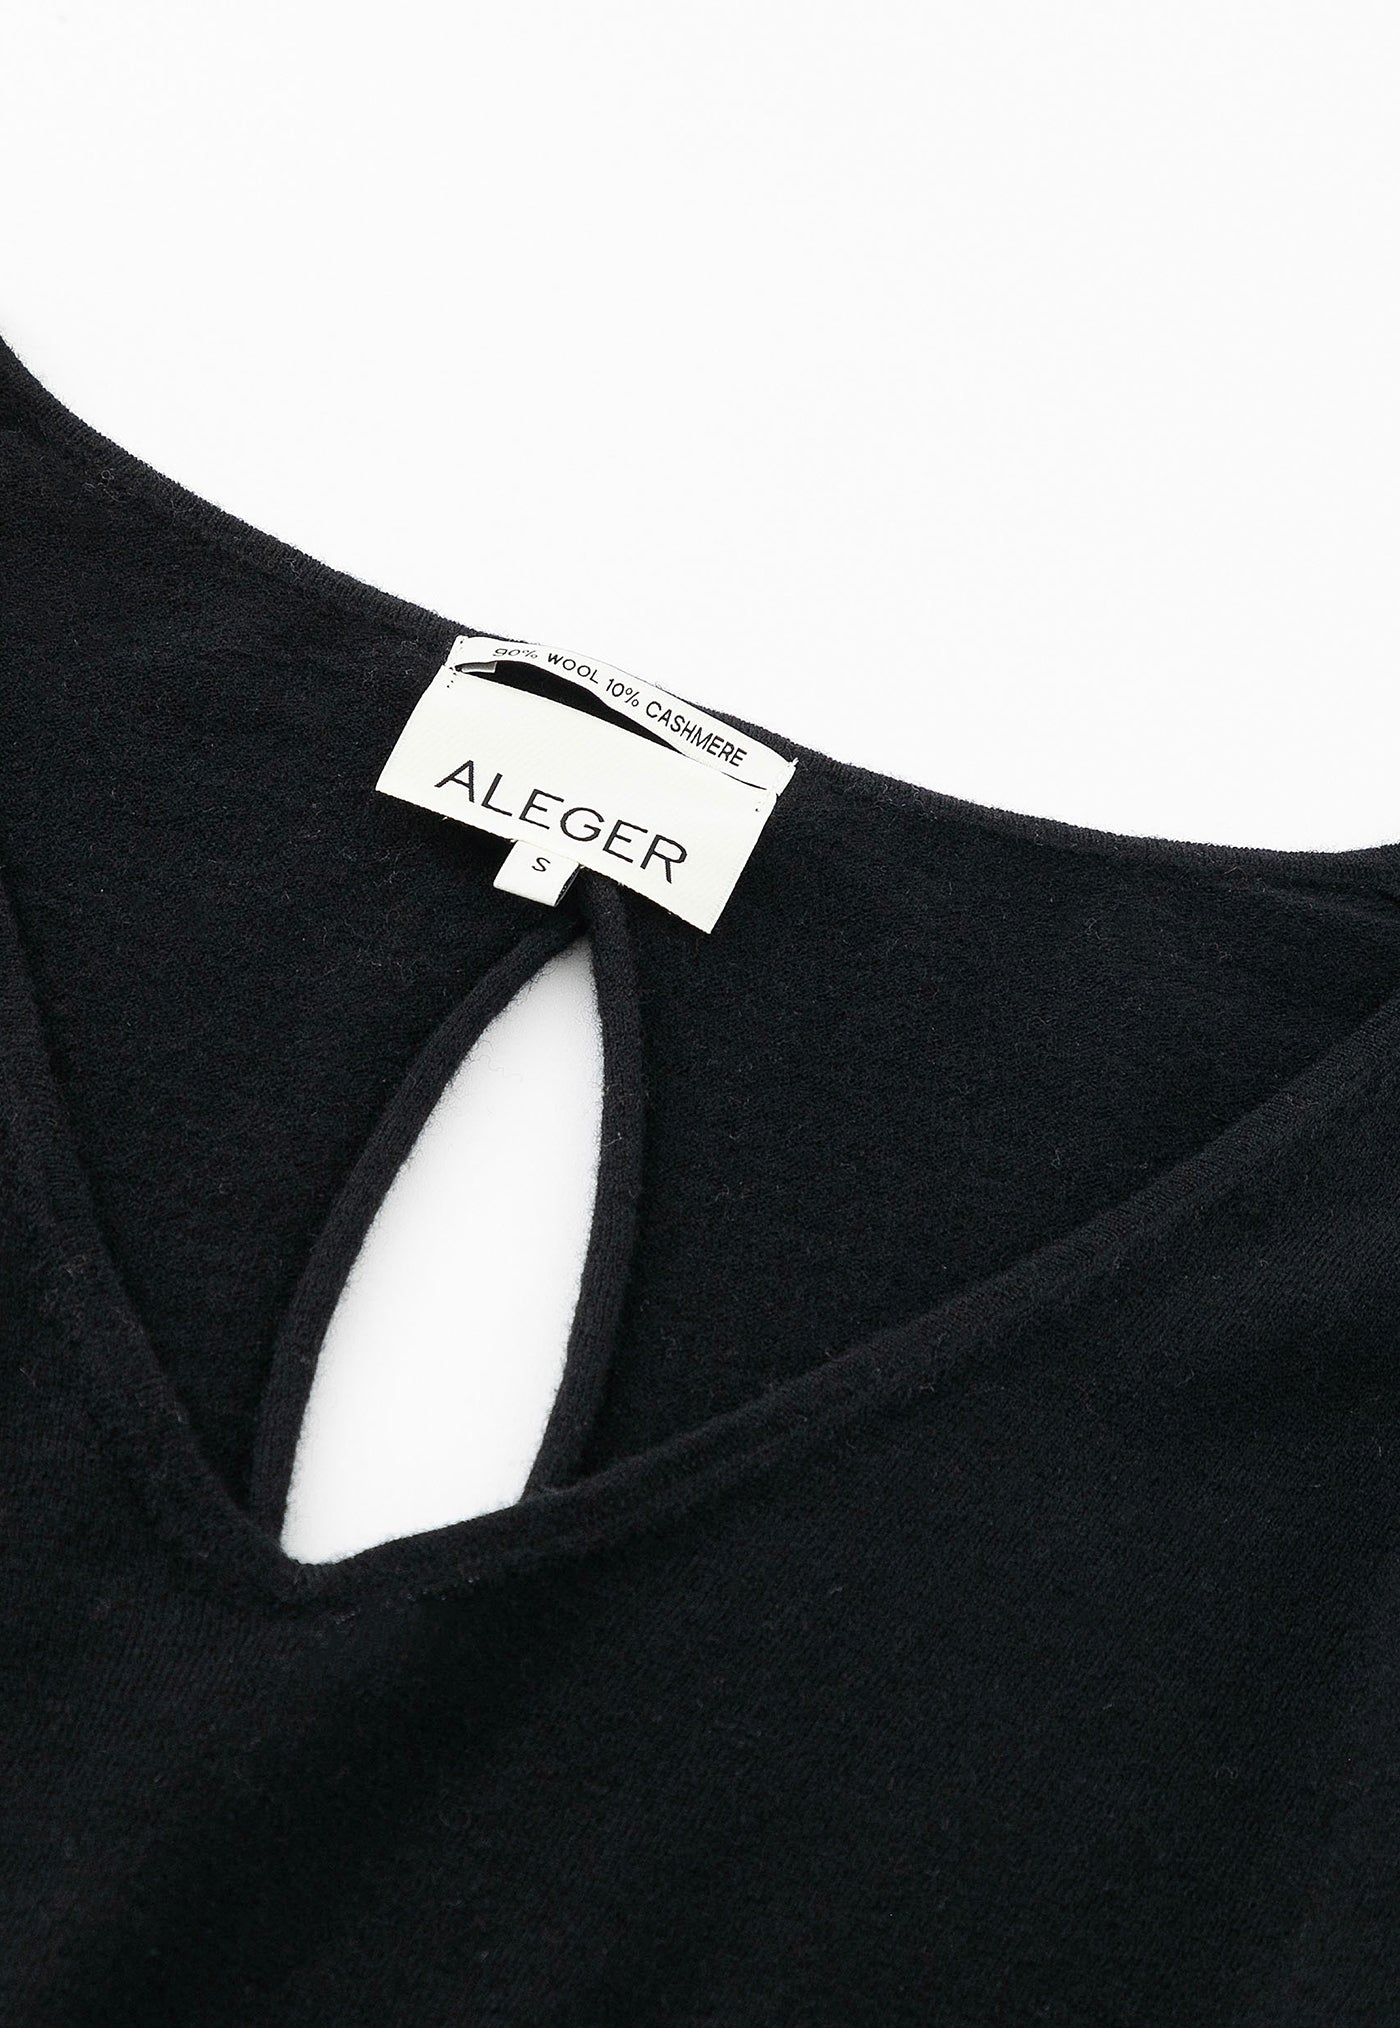 N.111 Wool/Cashmere Low V Sweater - Black sold by Angel Divine